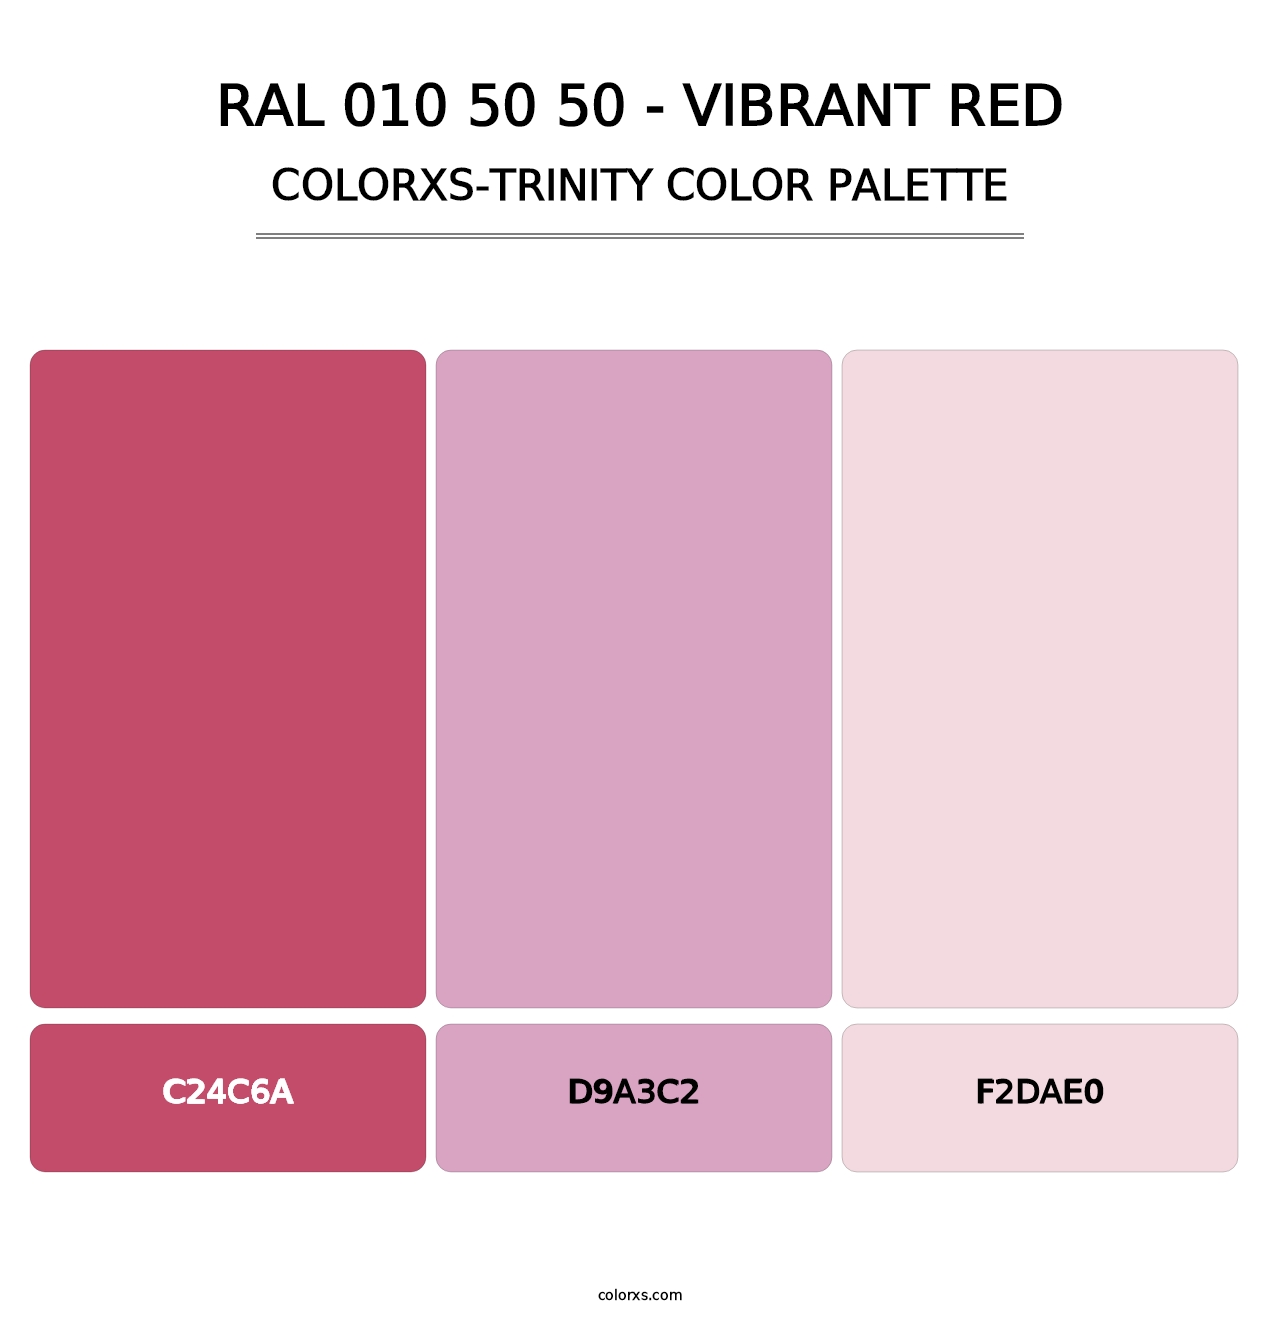 RAL 010 50 50 - Vibrant Red - Colorxs Trinity Palette